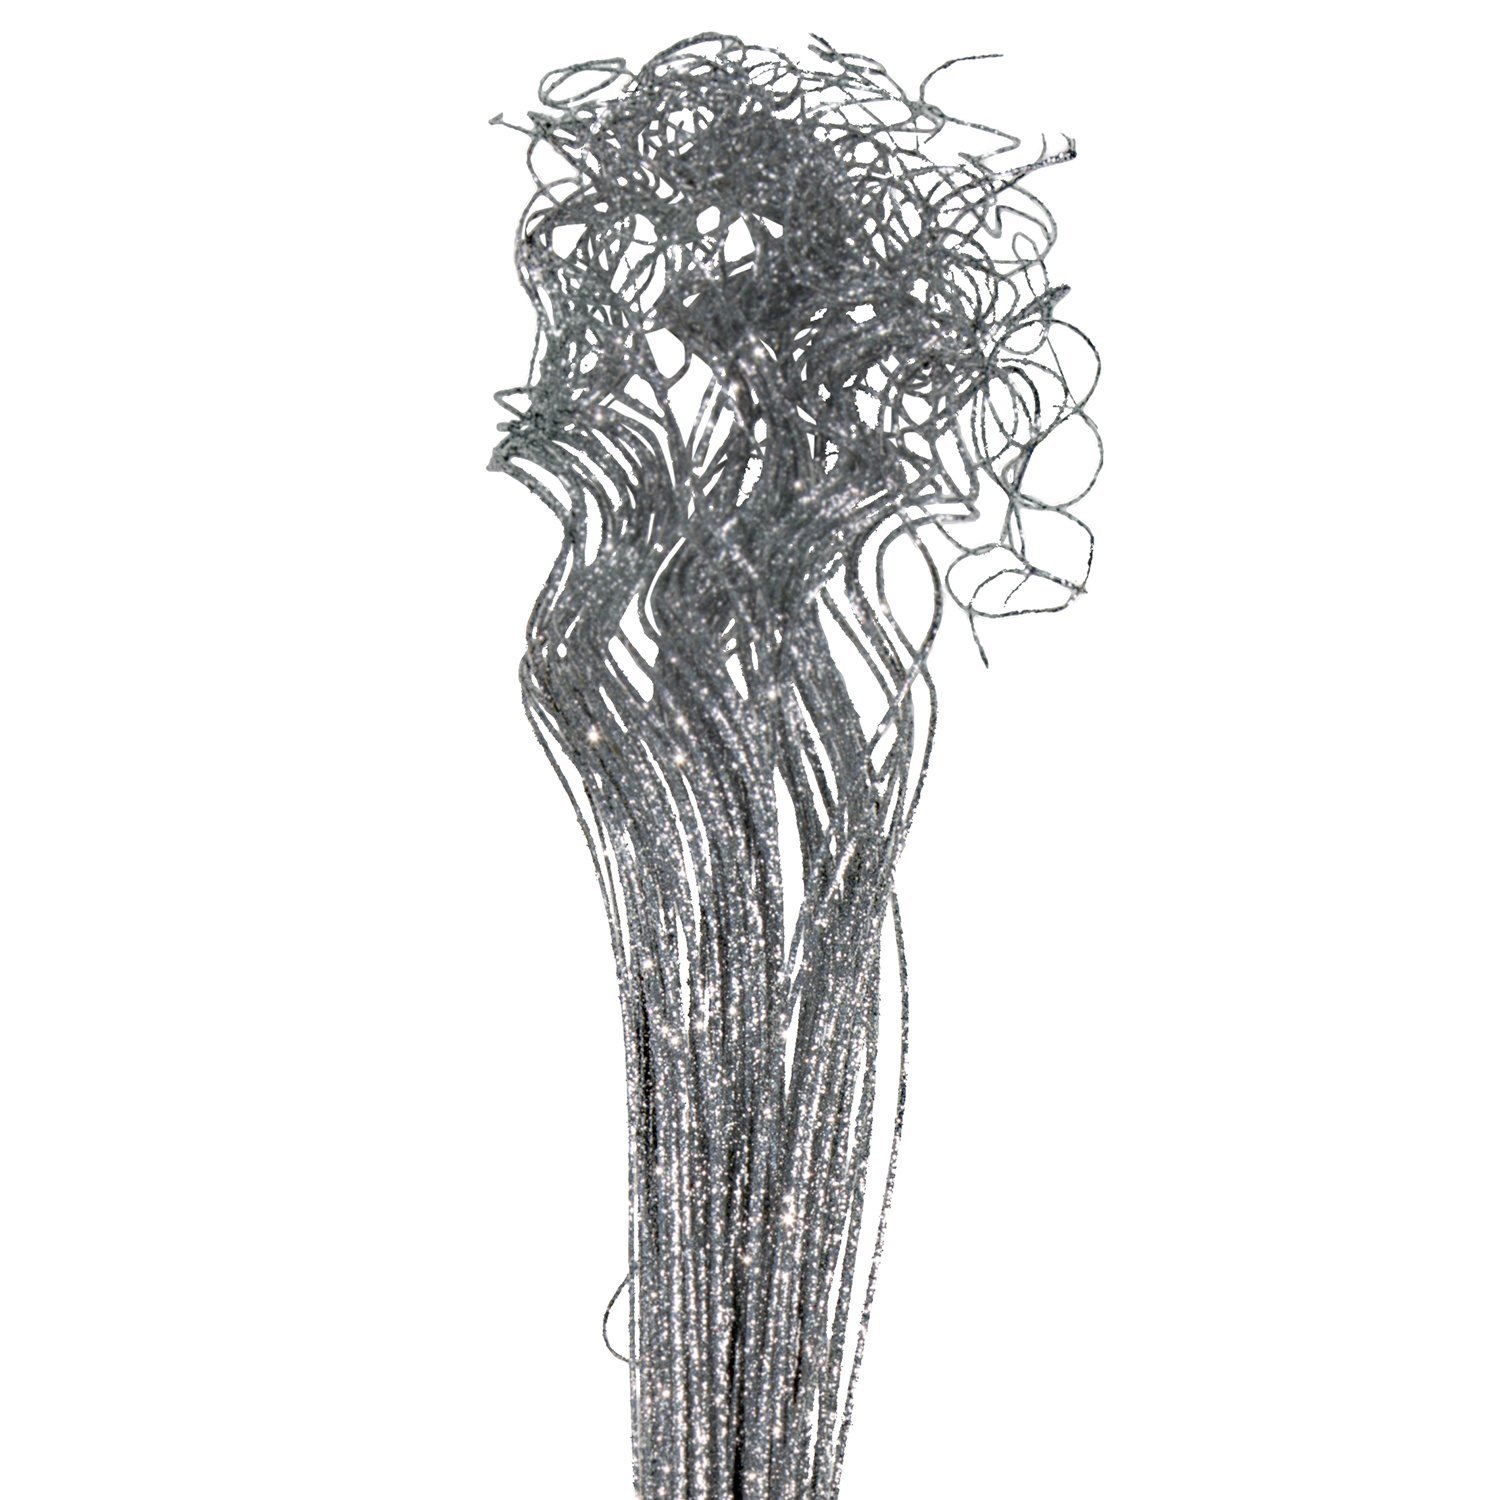 Amazon.com: Silver Sparkle Glitter Curly Ting Ting Branches Vase ...